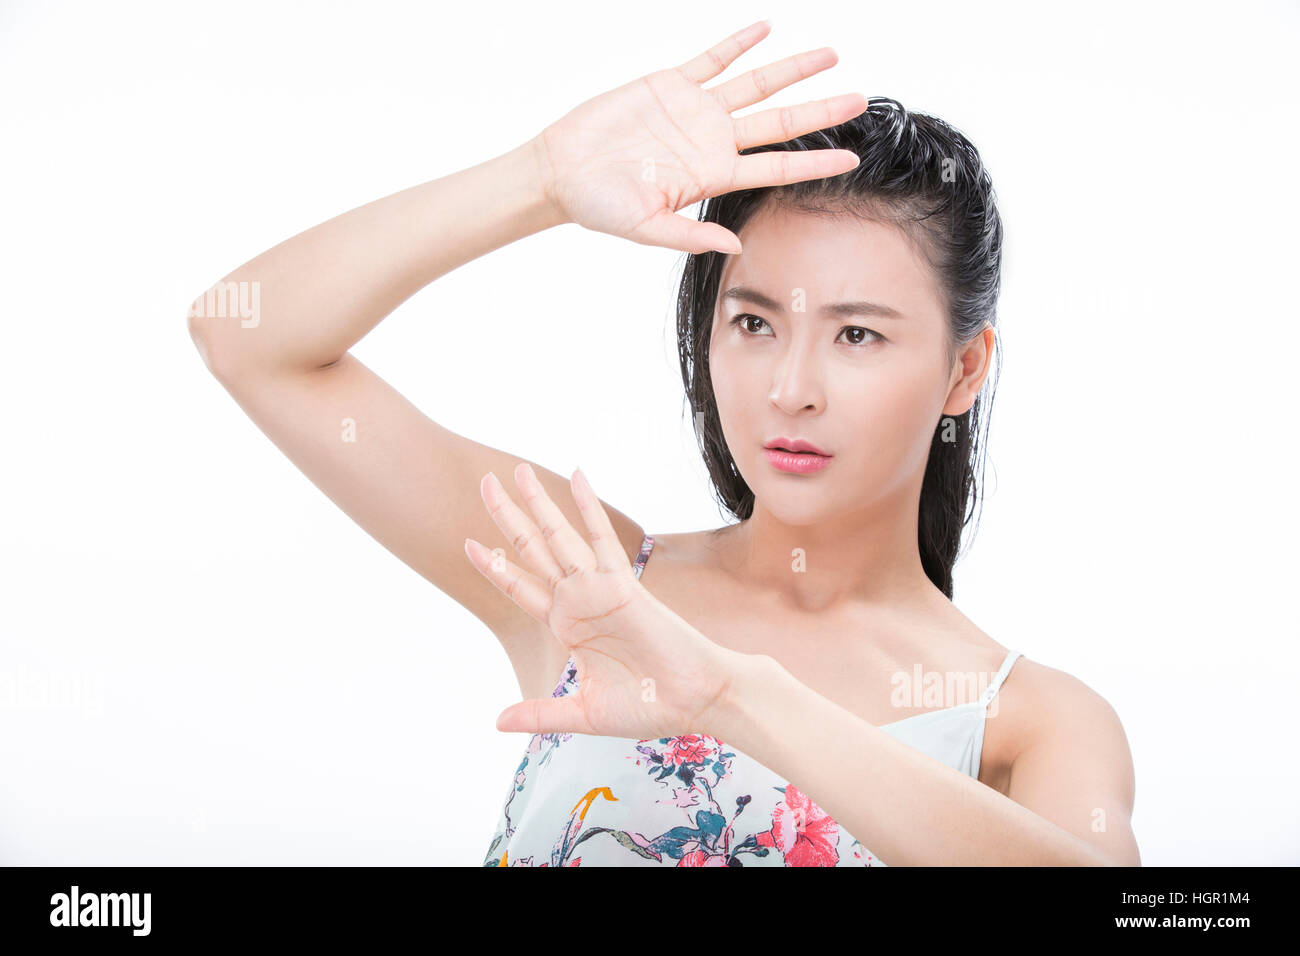 Portrait of young woman with wet hair frowing her face Stock Photo